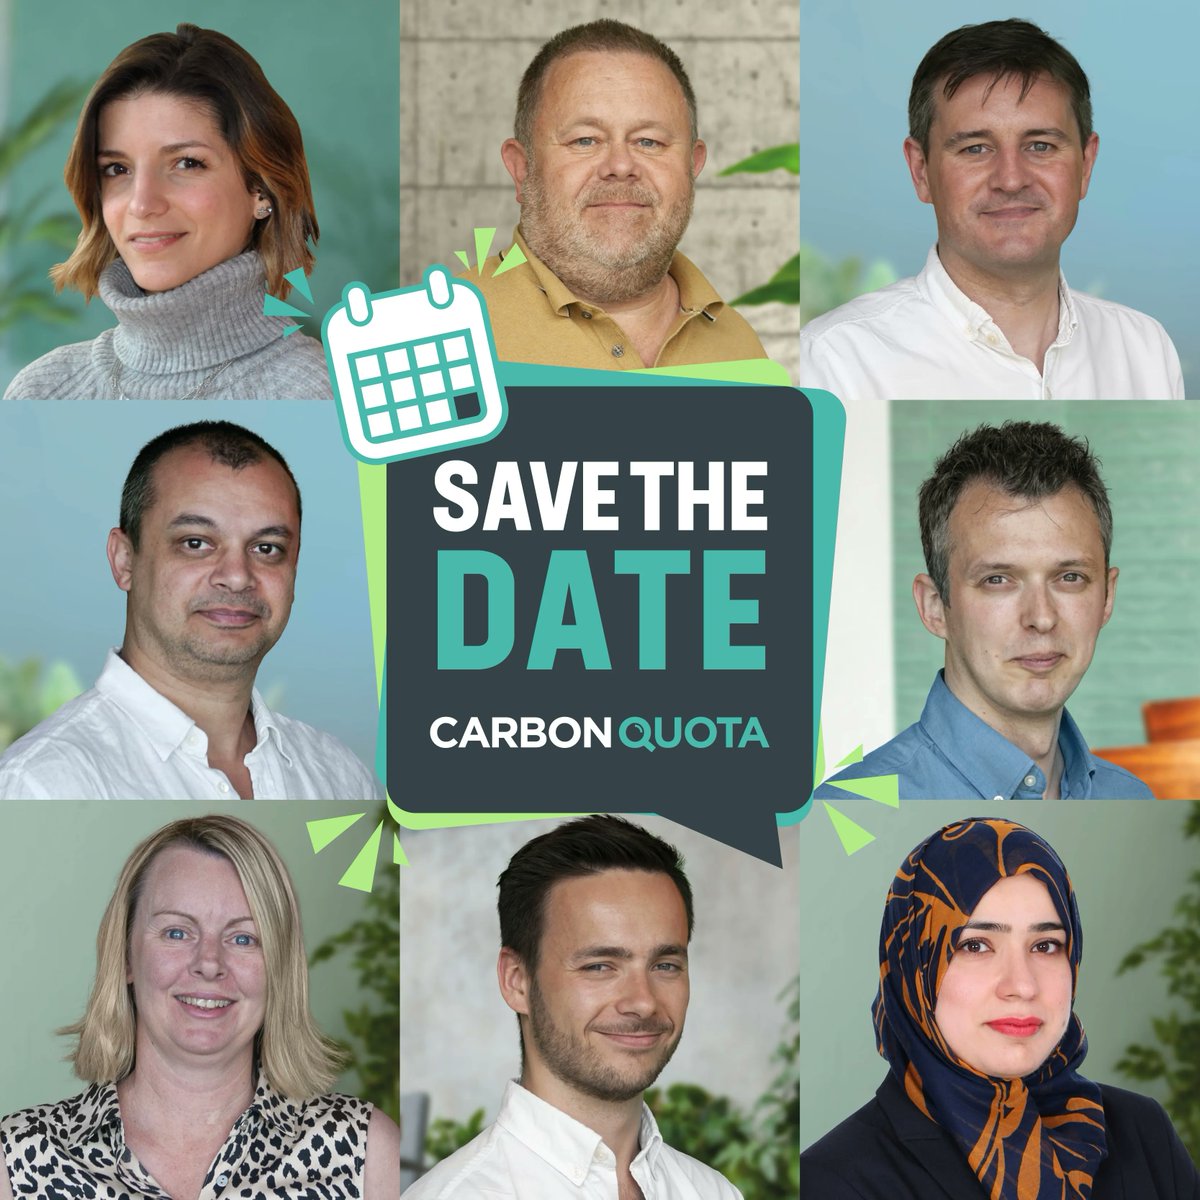 The CarbonQuota team is exhibiting at various events this year!

Next up: London Packaging Week, 21-22 September at the Excel London.

Learn about carbon management and ask us your burning questions!

Follow for updates.

#savethedate #carbonfootprint #sustainability #London